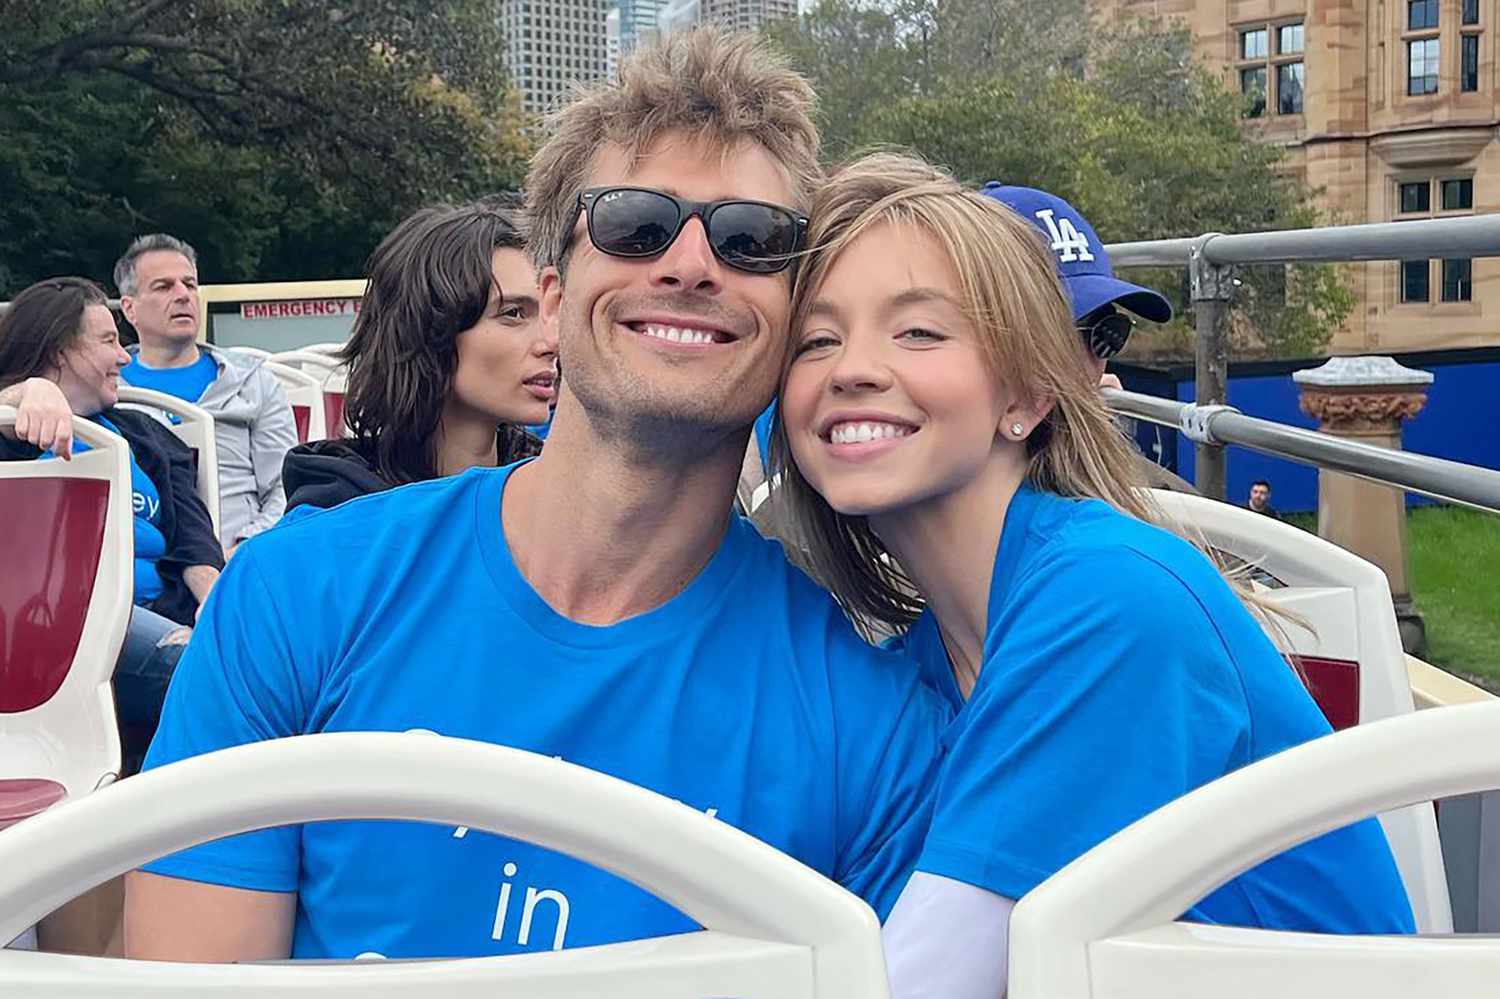 Sydney Sweeney Shares Playful Moments With Glen Powell During Film Shoot